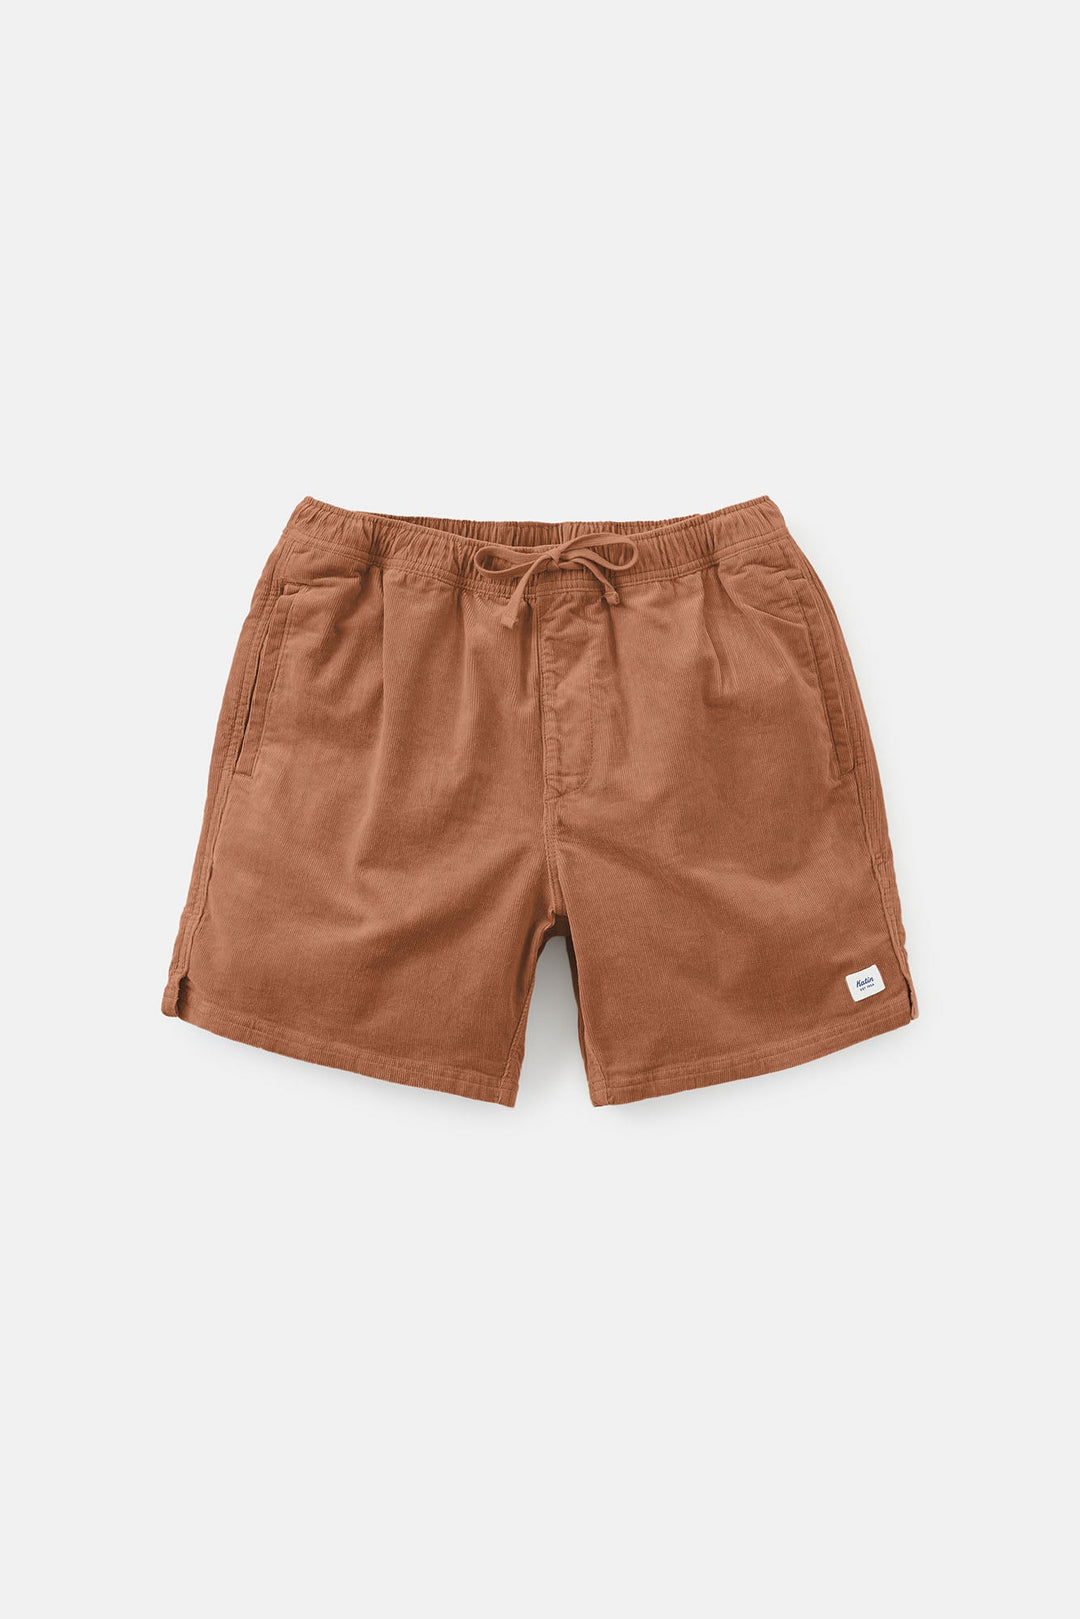 Katin Cord Local Short - Rust (Front Detail)